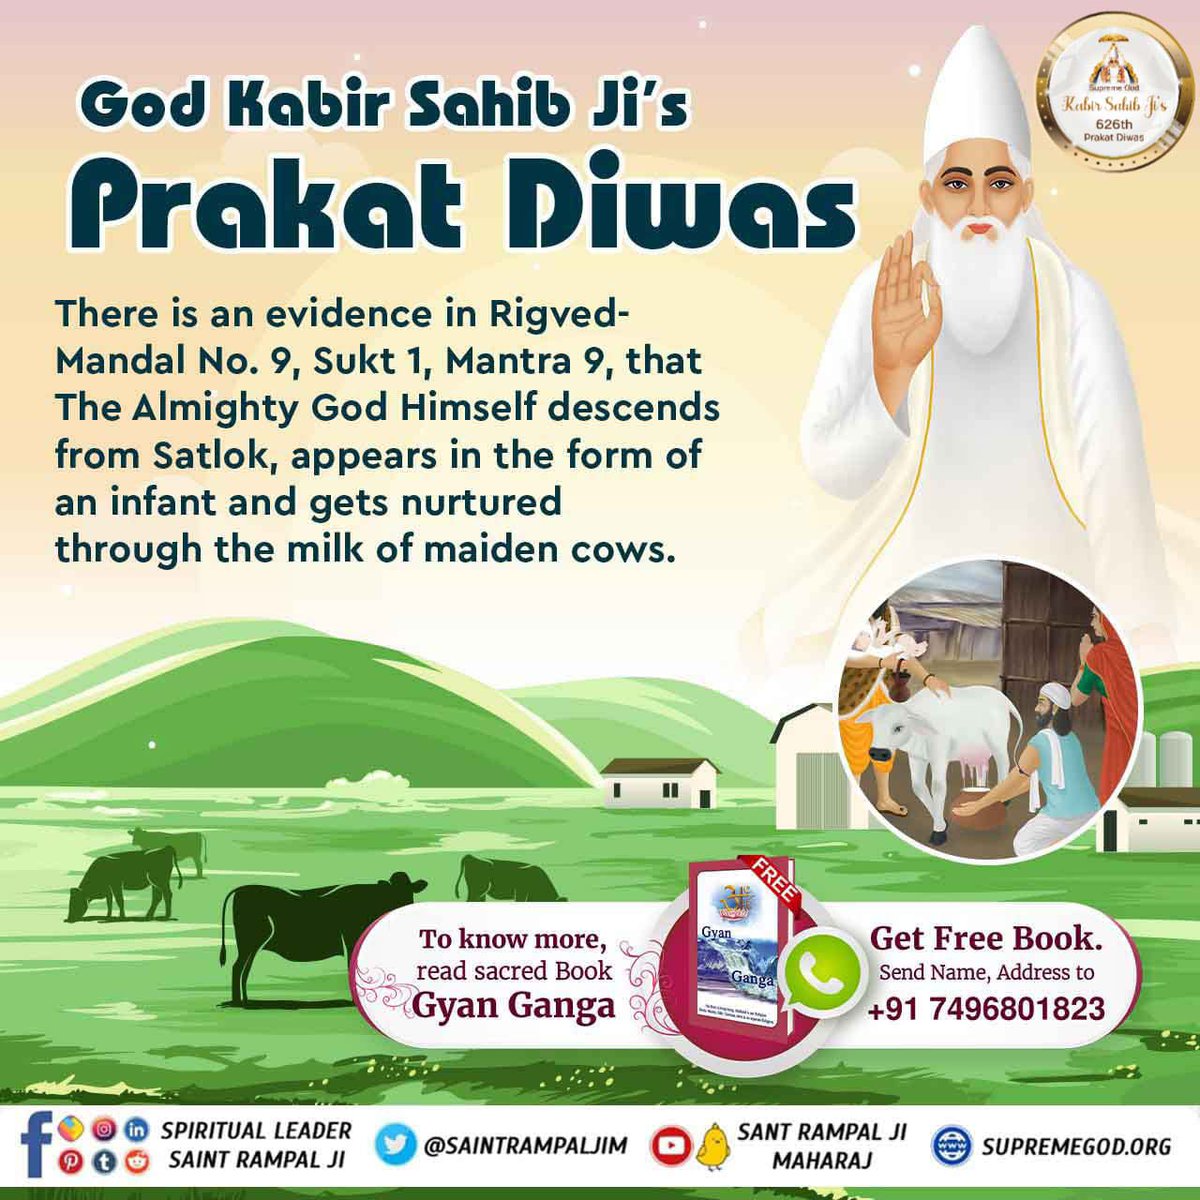 #626वां_कबीरसाहेब_प्रकटदिवस
💥💐🌹600 years ago when God Kabir Ji (KavirDev Ji)

 At that time, the real knowledge of all the scriptures was revealed to the common people in simple language through proverbs (couplets, chopais, words i.e. poems).
Watch Live Program